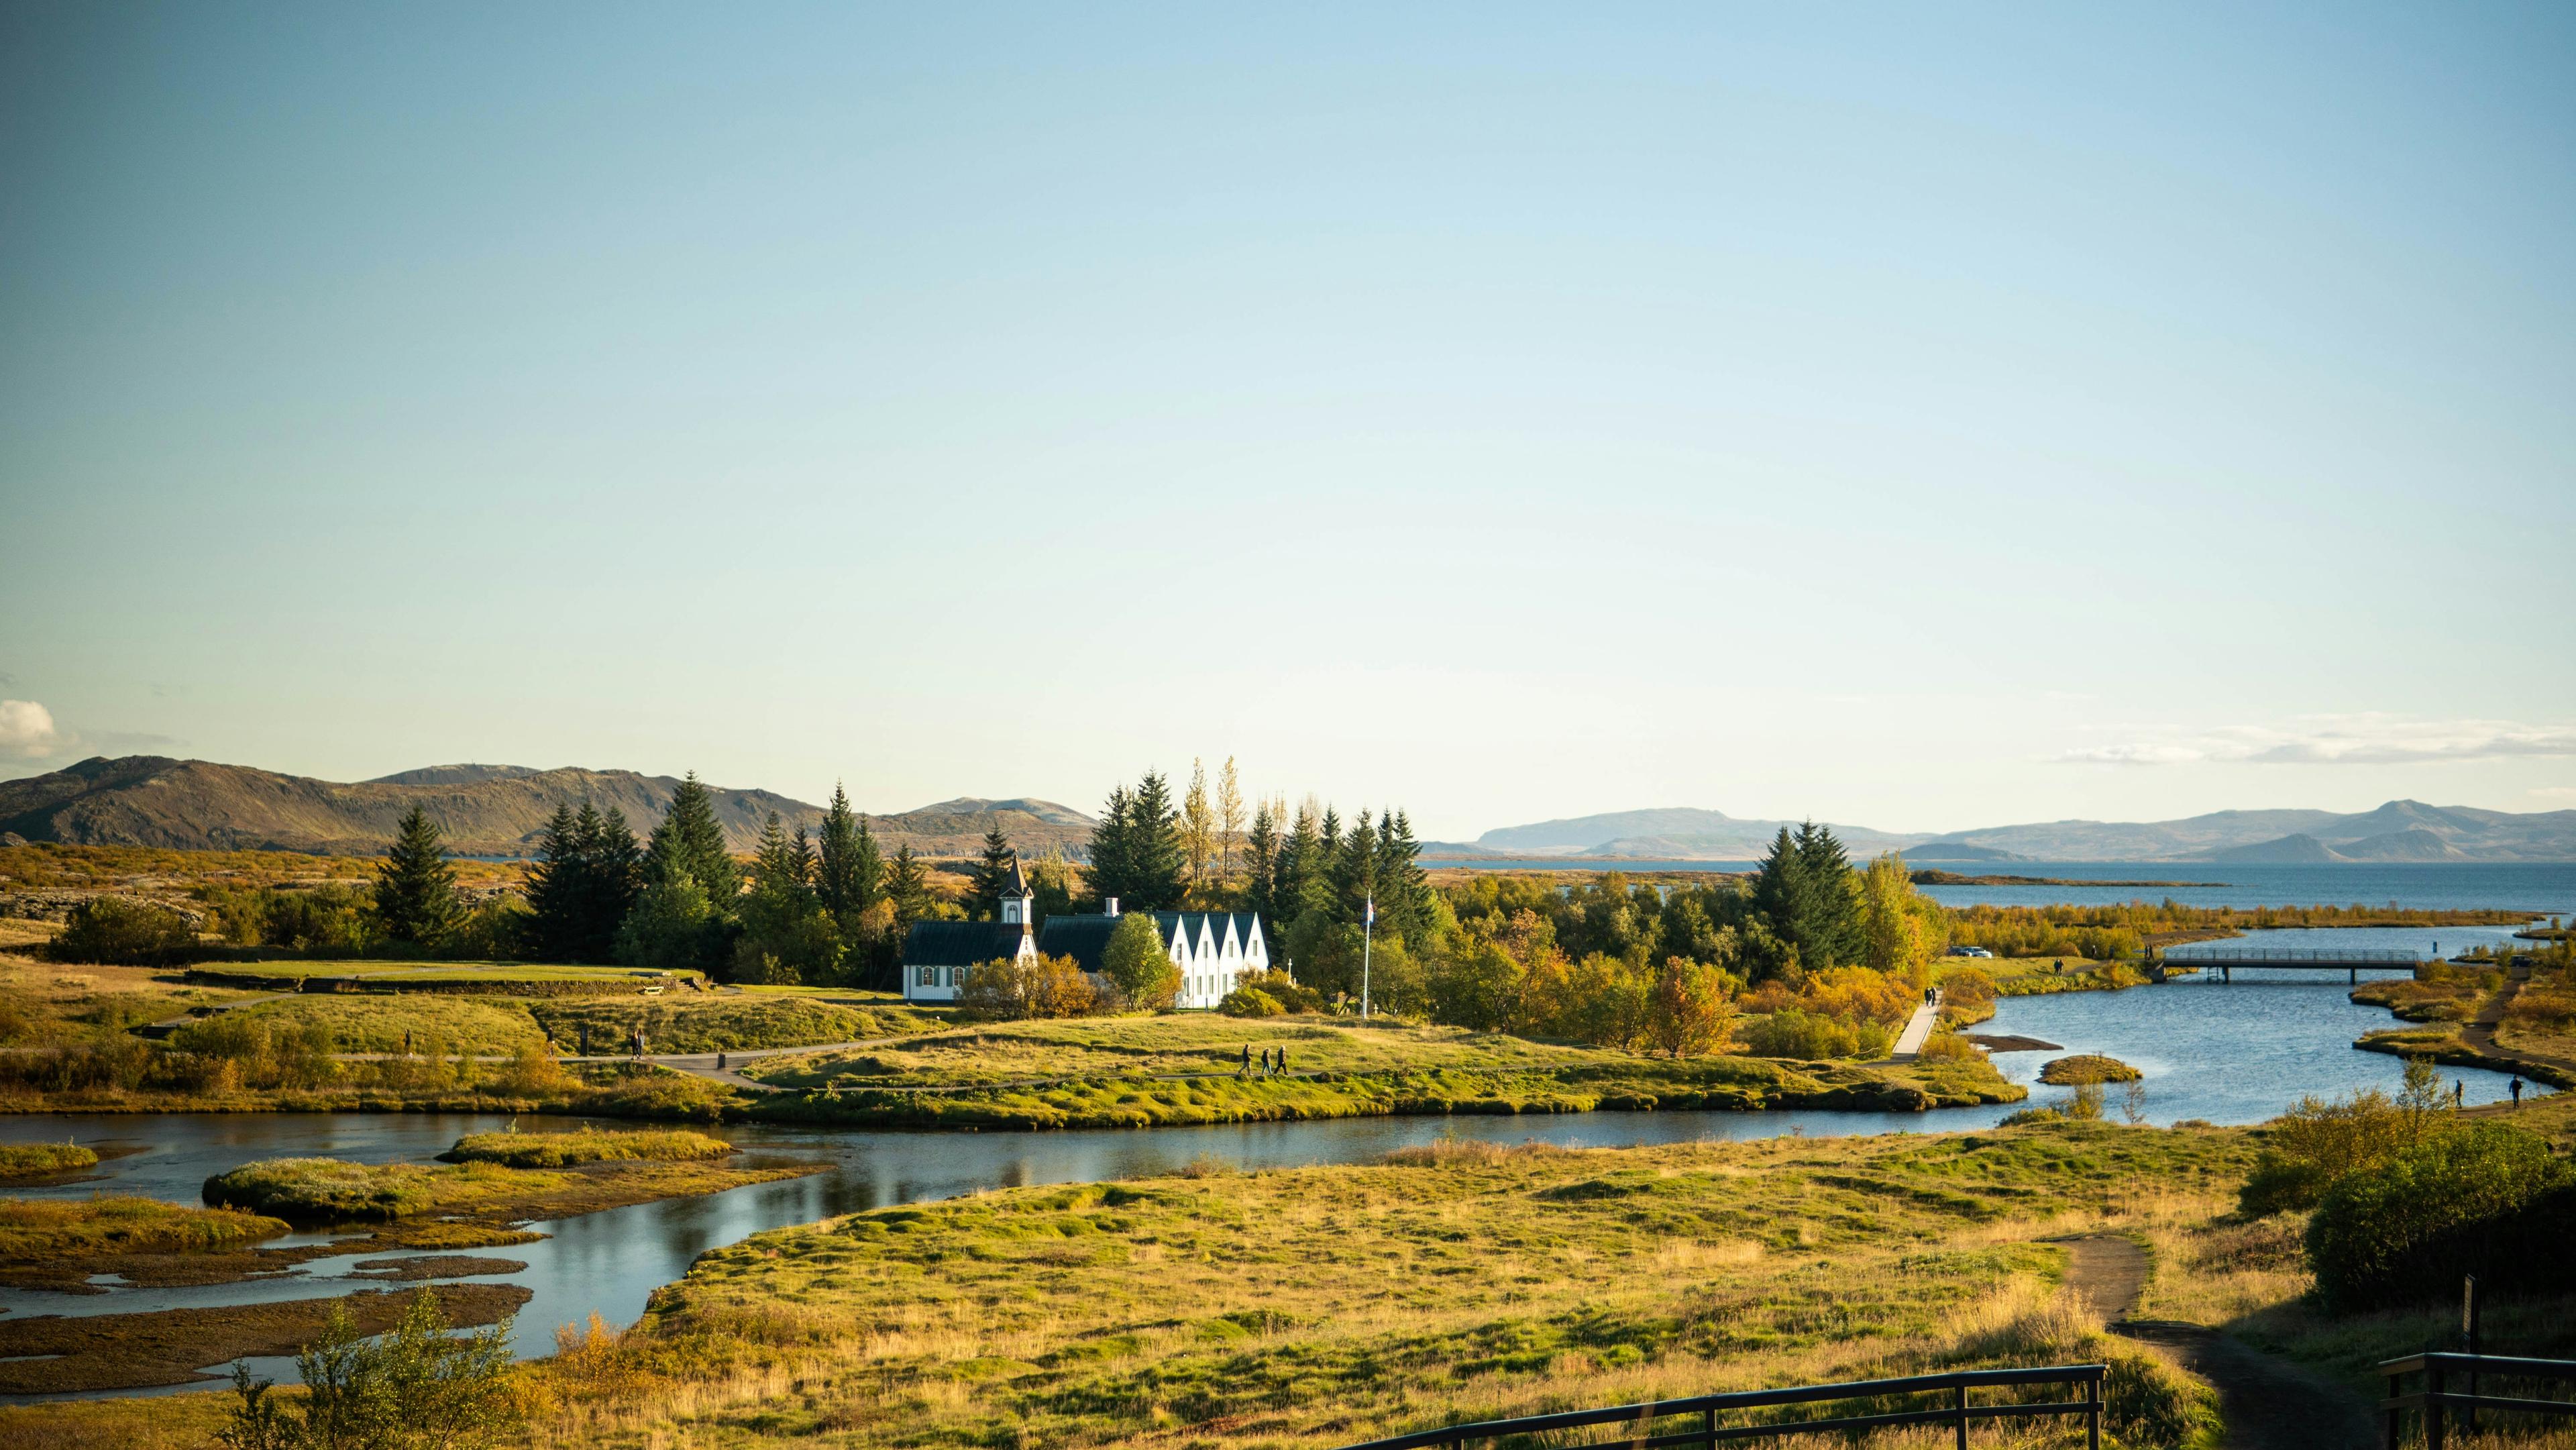 Panoramic view of Þingvellir National Park with its dramatic rift valley landscape, showcasing the autumn-hued vegetation and the winding Oxara River leading to a distant church beside the water.